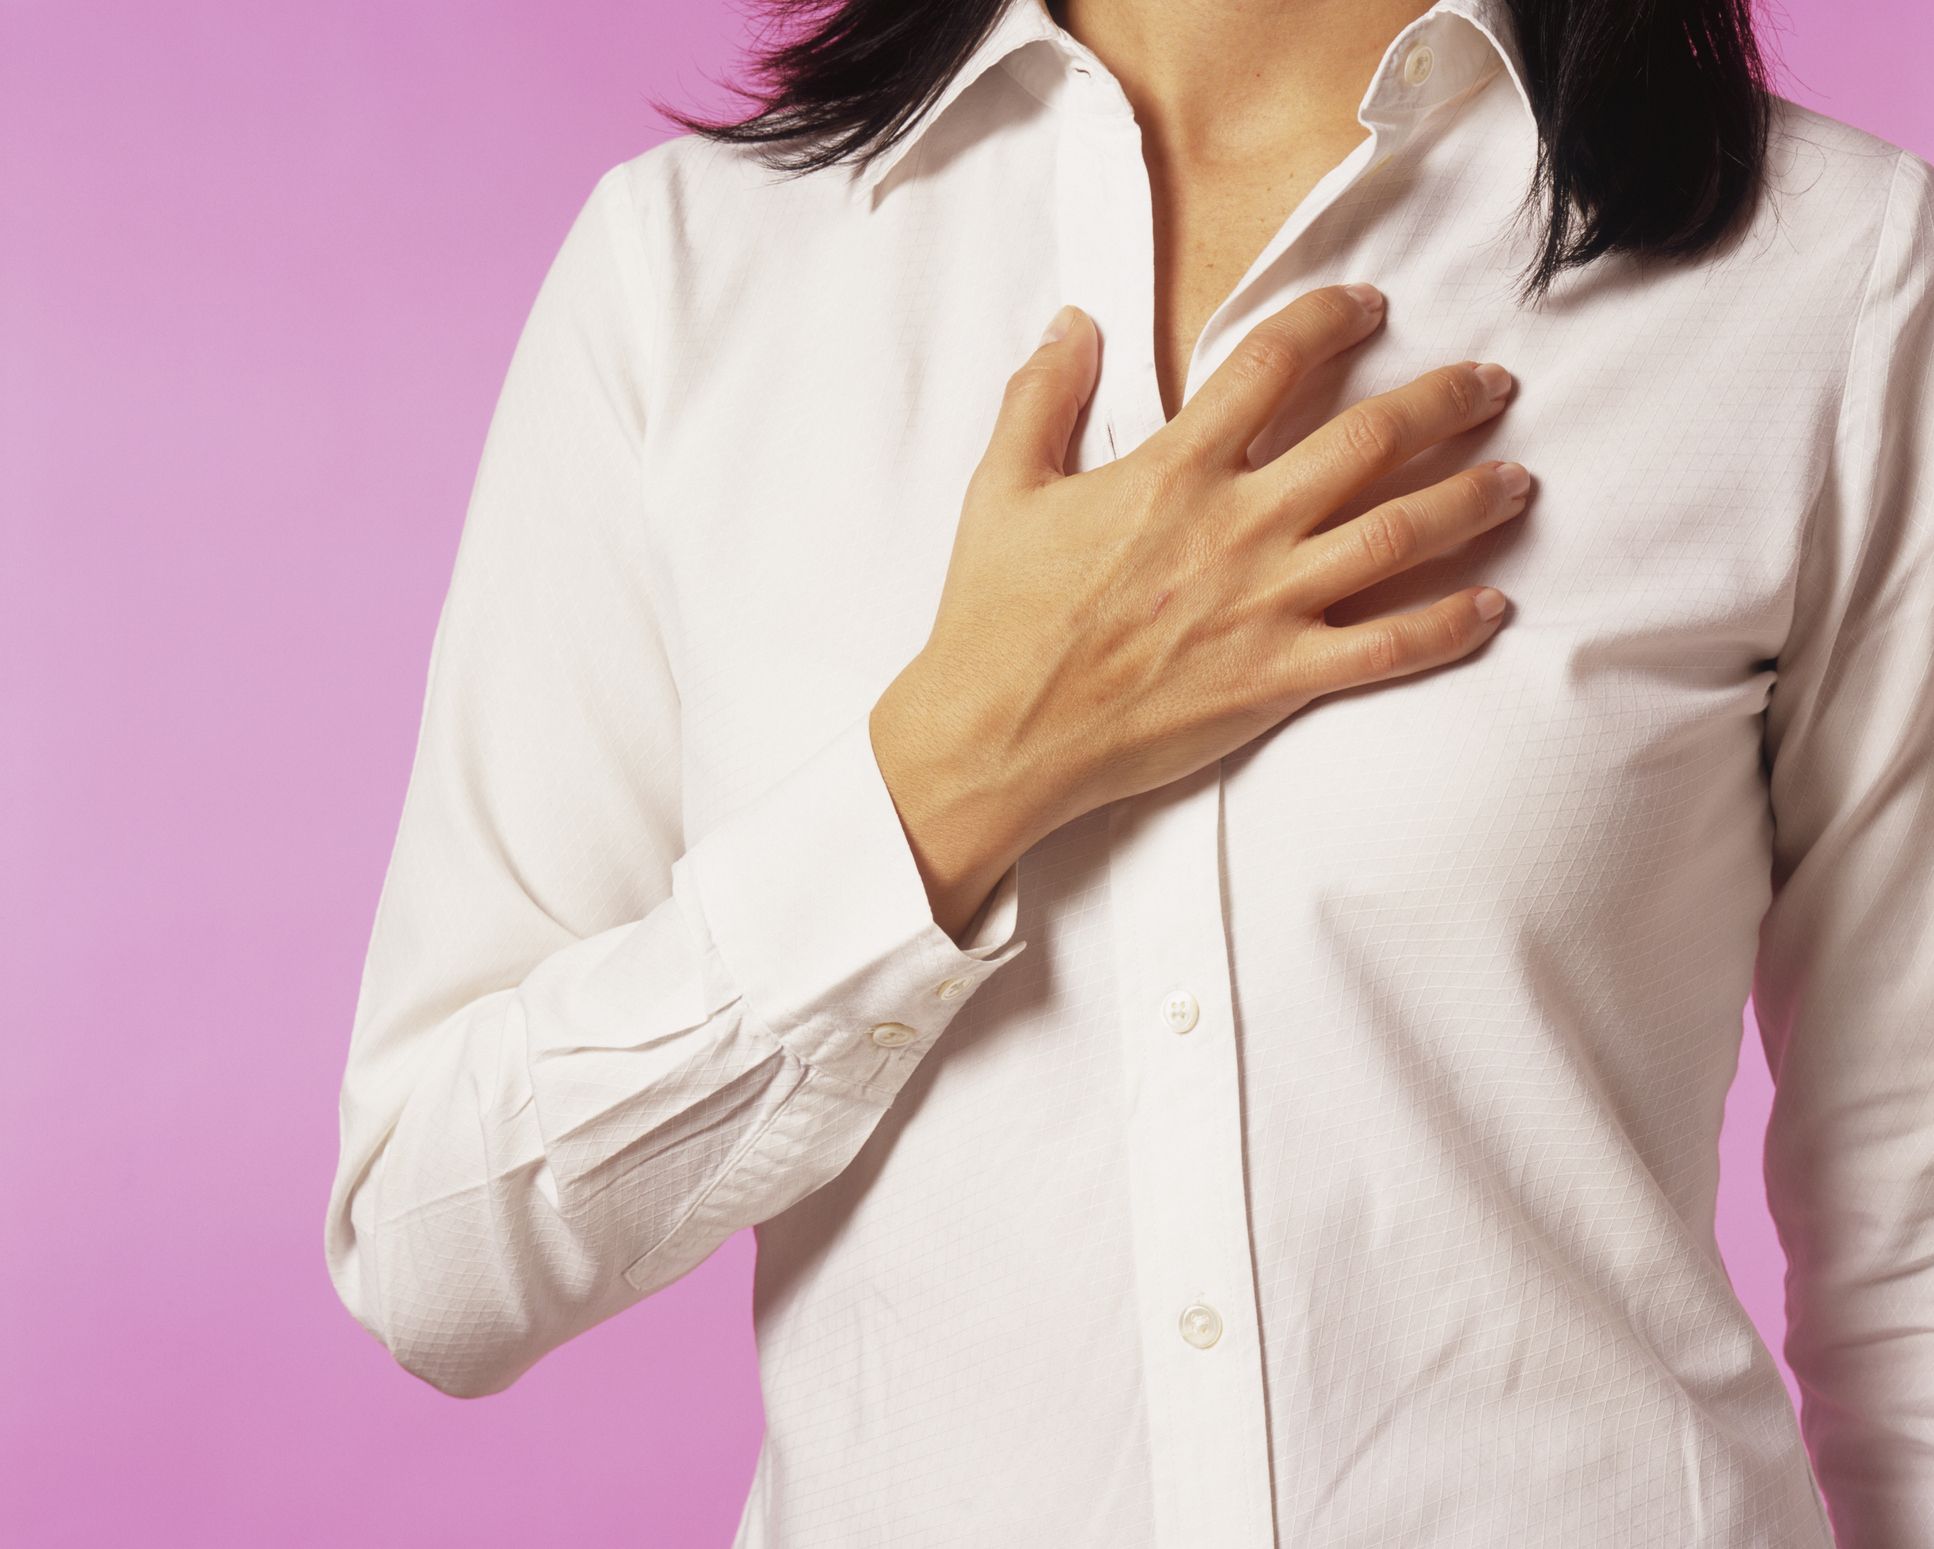 What Does Itchy Breast Mean